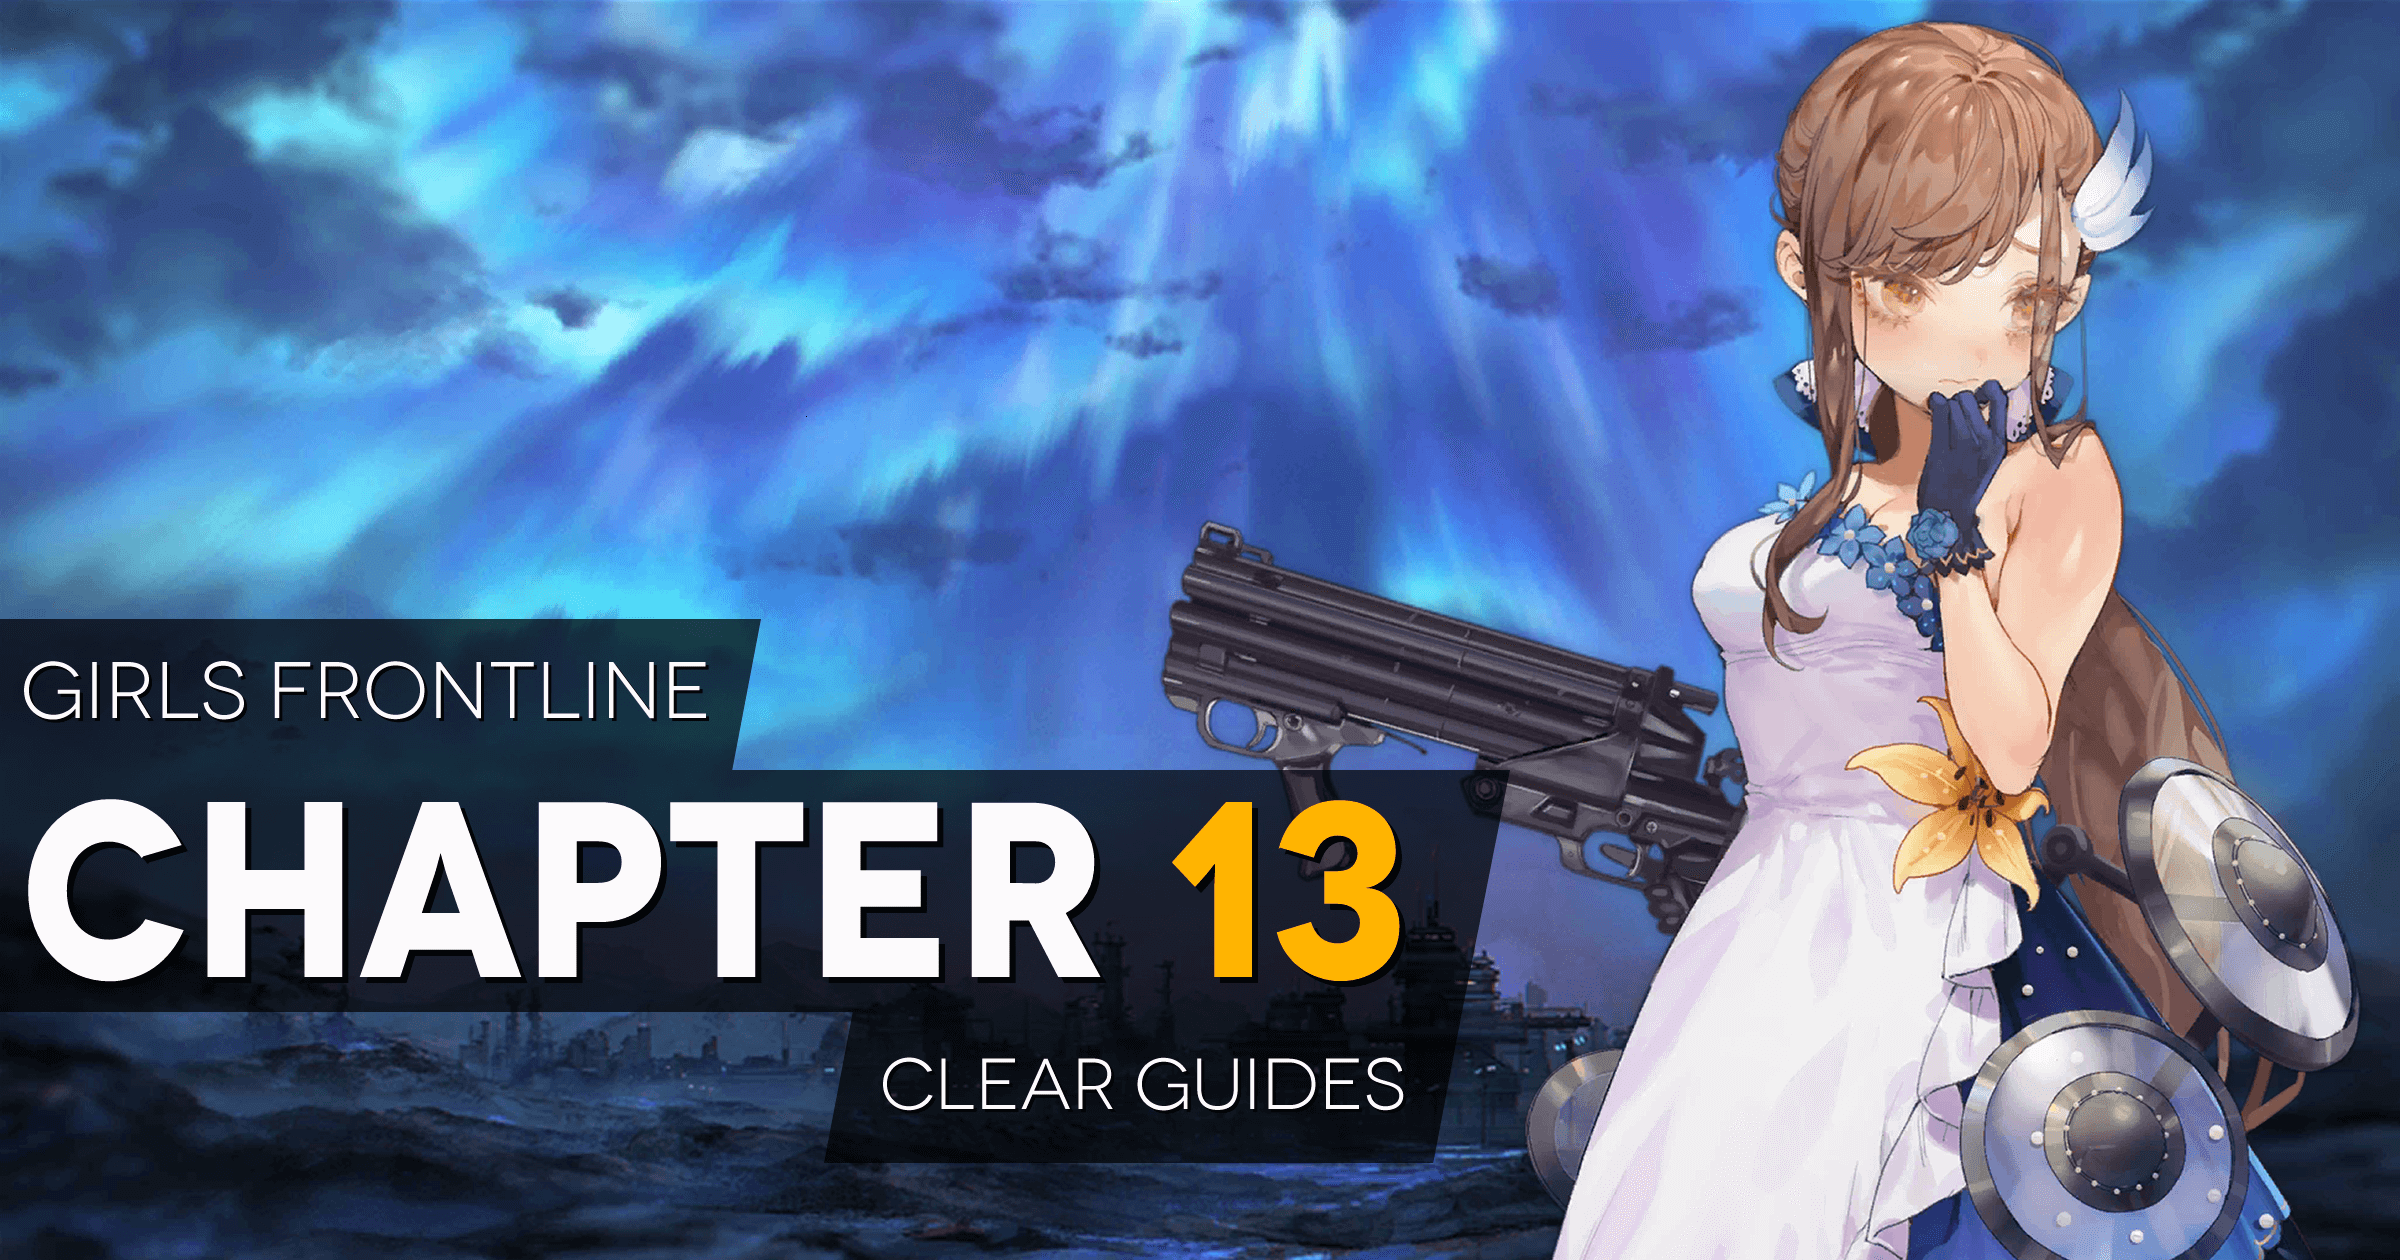 Banner Image for the Girls Frontline Chapter 13 Guides landing page. 